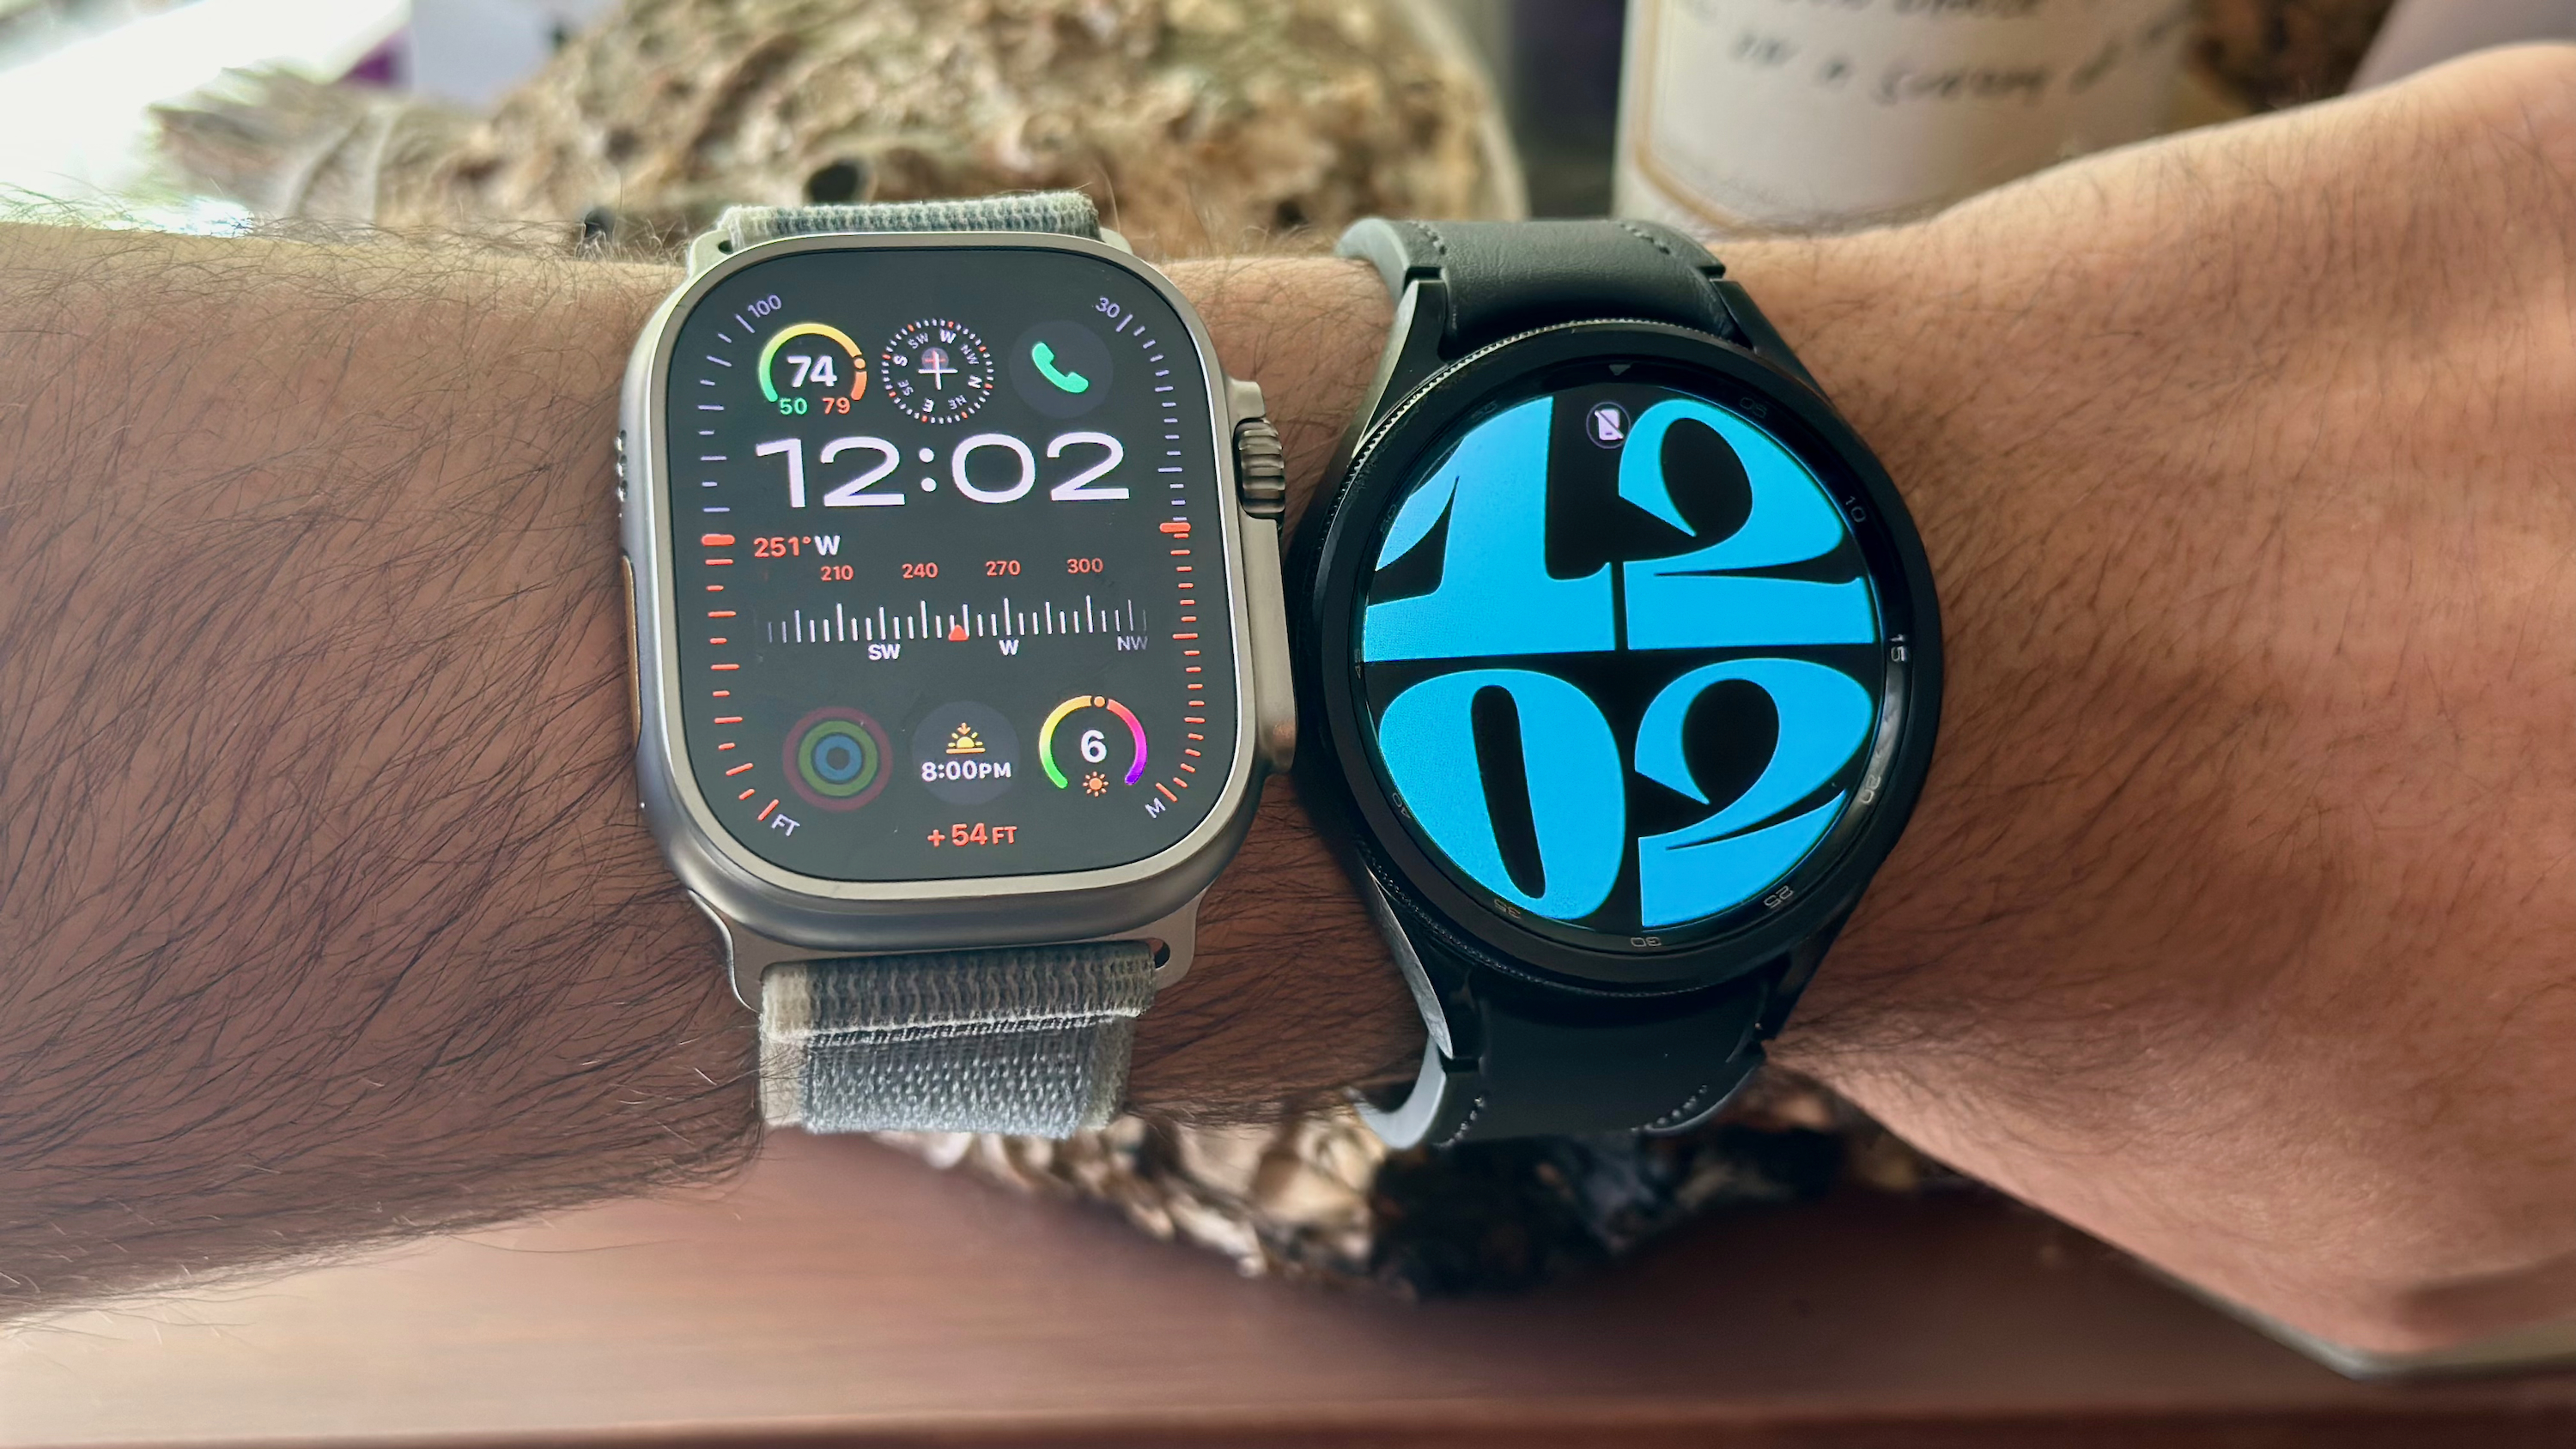 The Apple Watch Ultra 2 (left) and Samsung Galaxy Watch 6 Classic (right) worn on one wrist.